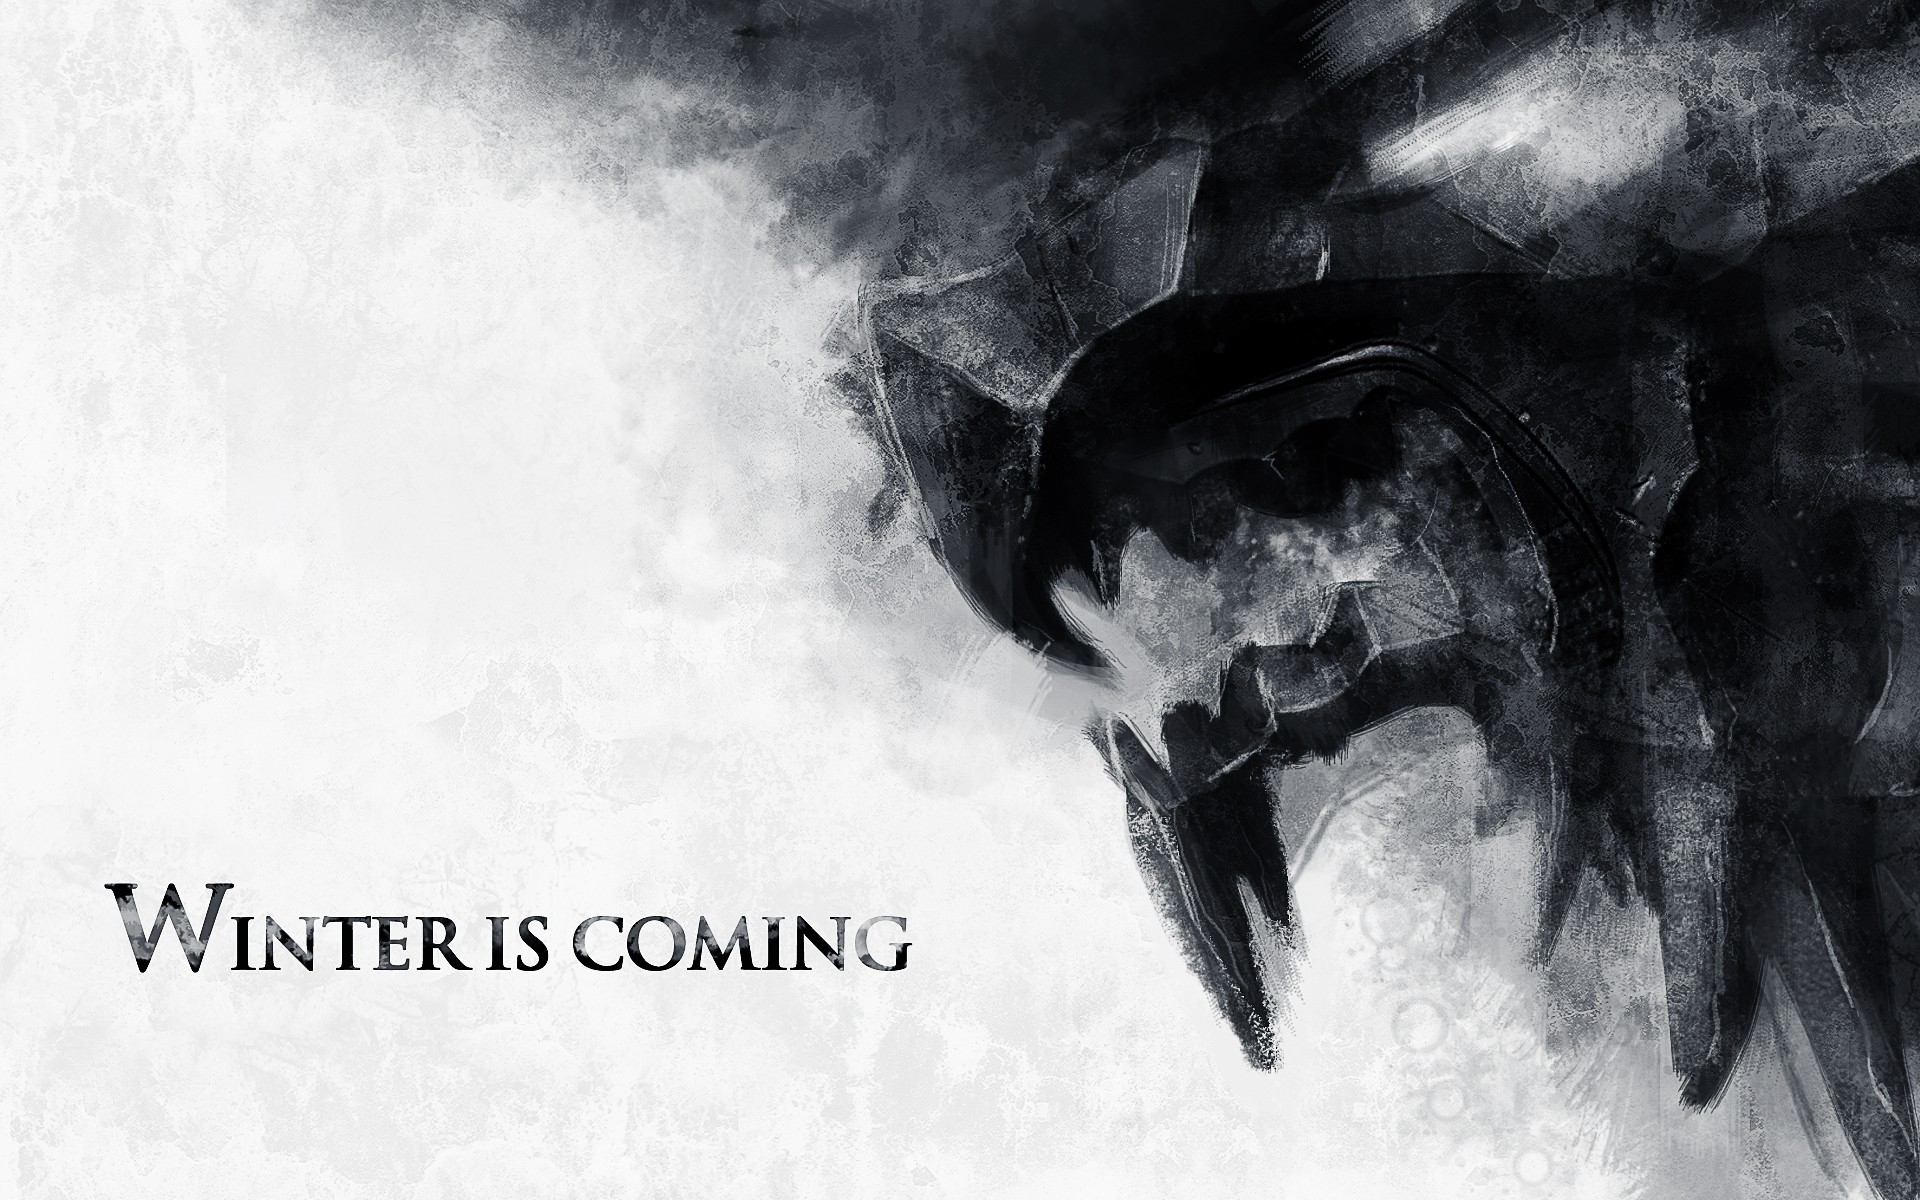 Game Of Thrones, A Song Of Ice And Fire, House Stark, Direwolf, Winter Is Coming Wallpaper